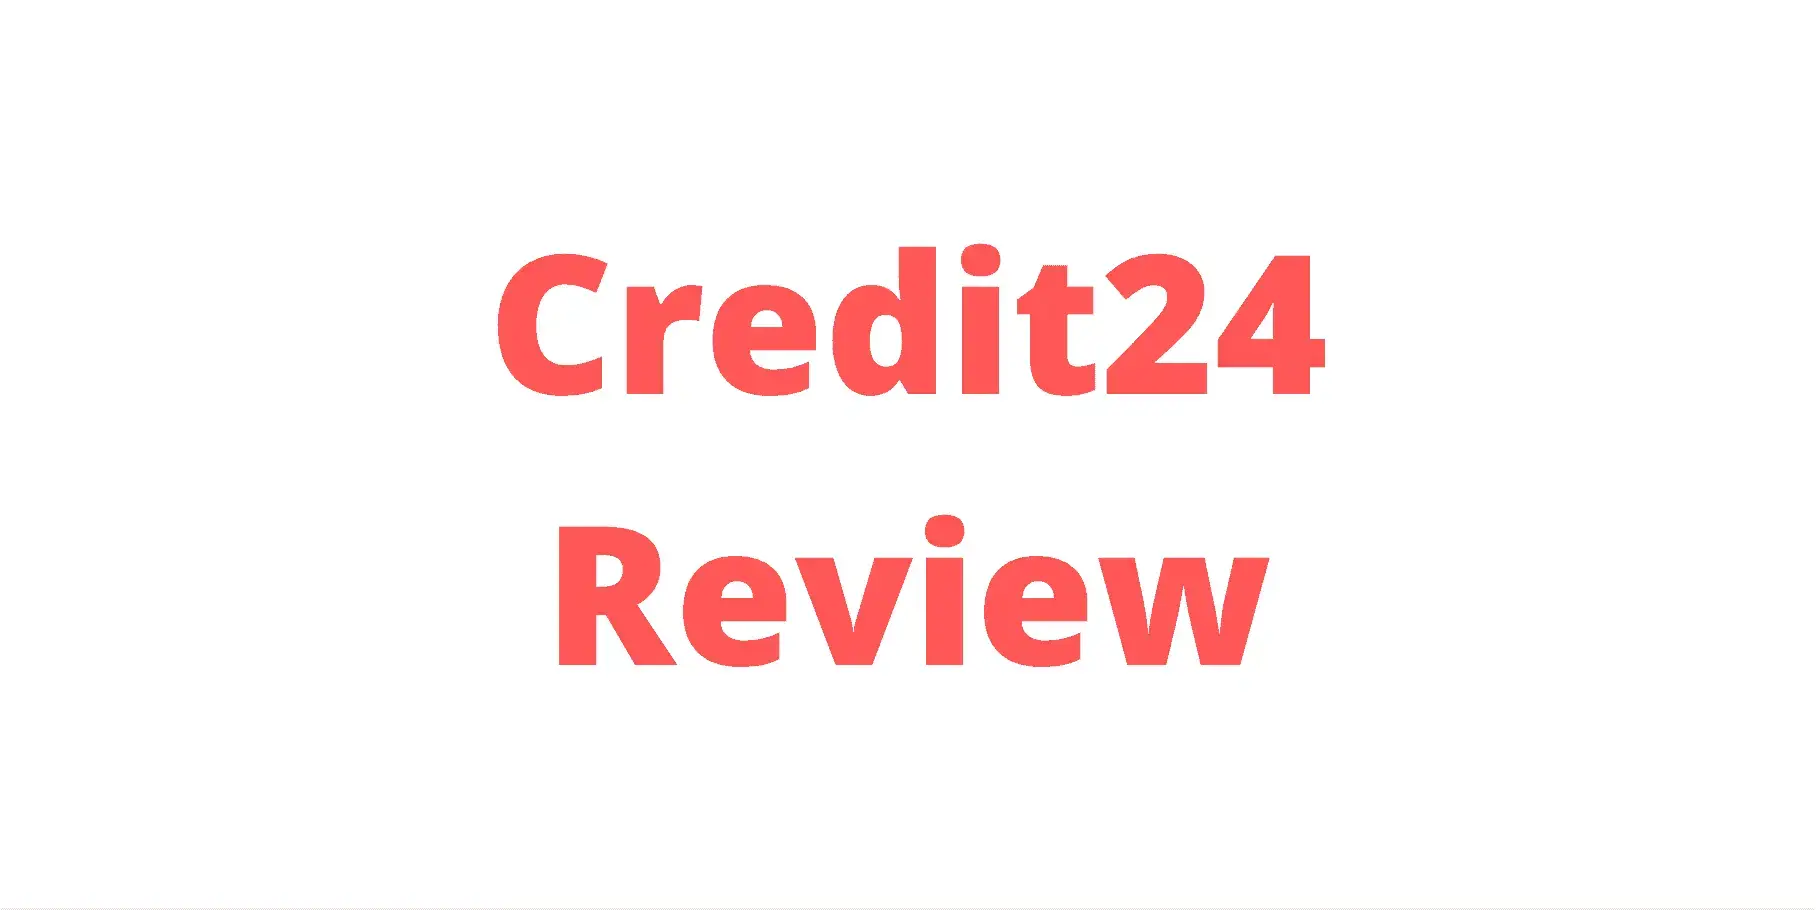 Review of Credit24